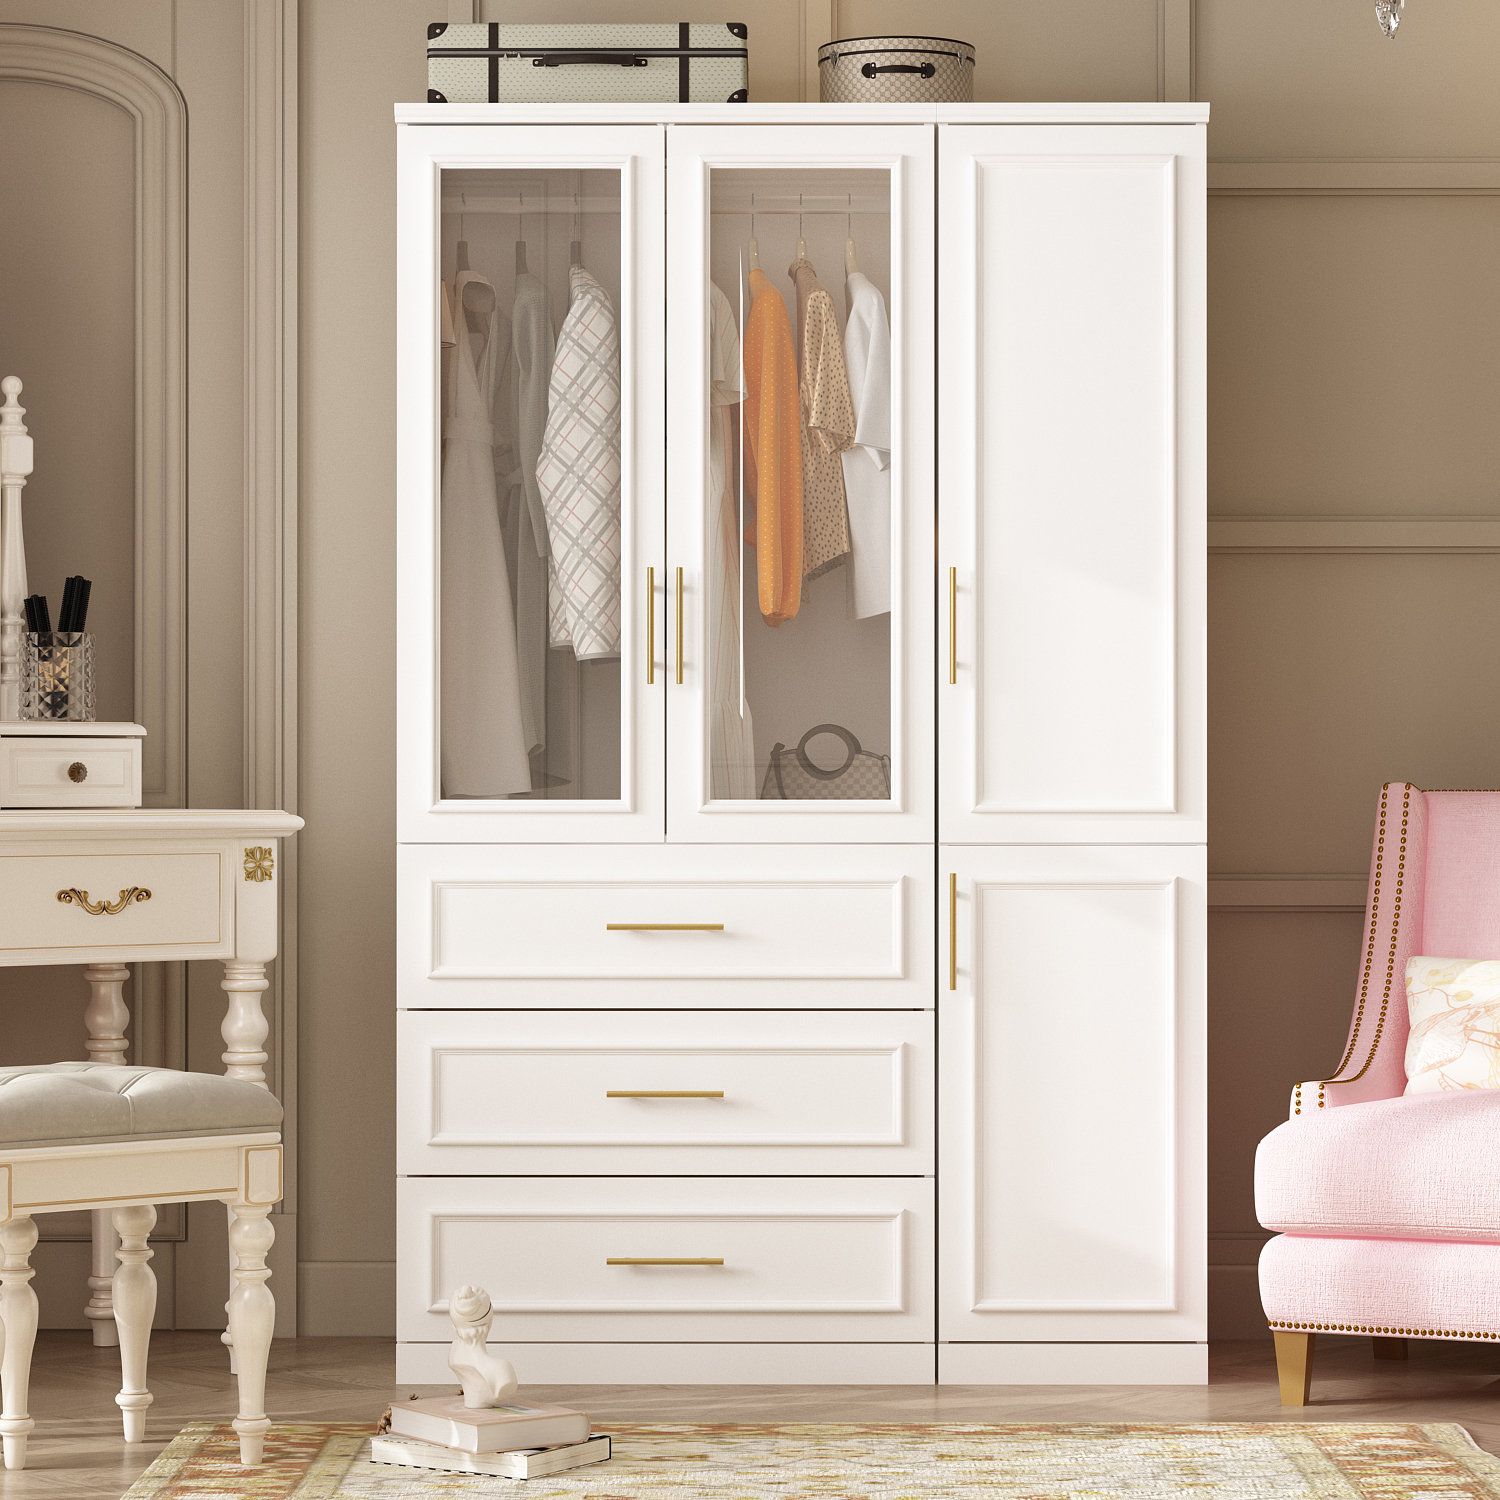 Latitude Run® Armoire | Wayfair Within Cheap Wardrobes And Chest Of Drawers (View 12 of 15)